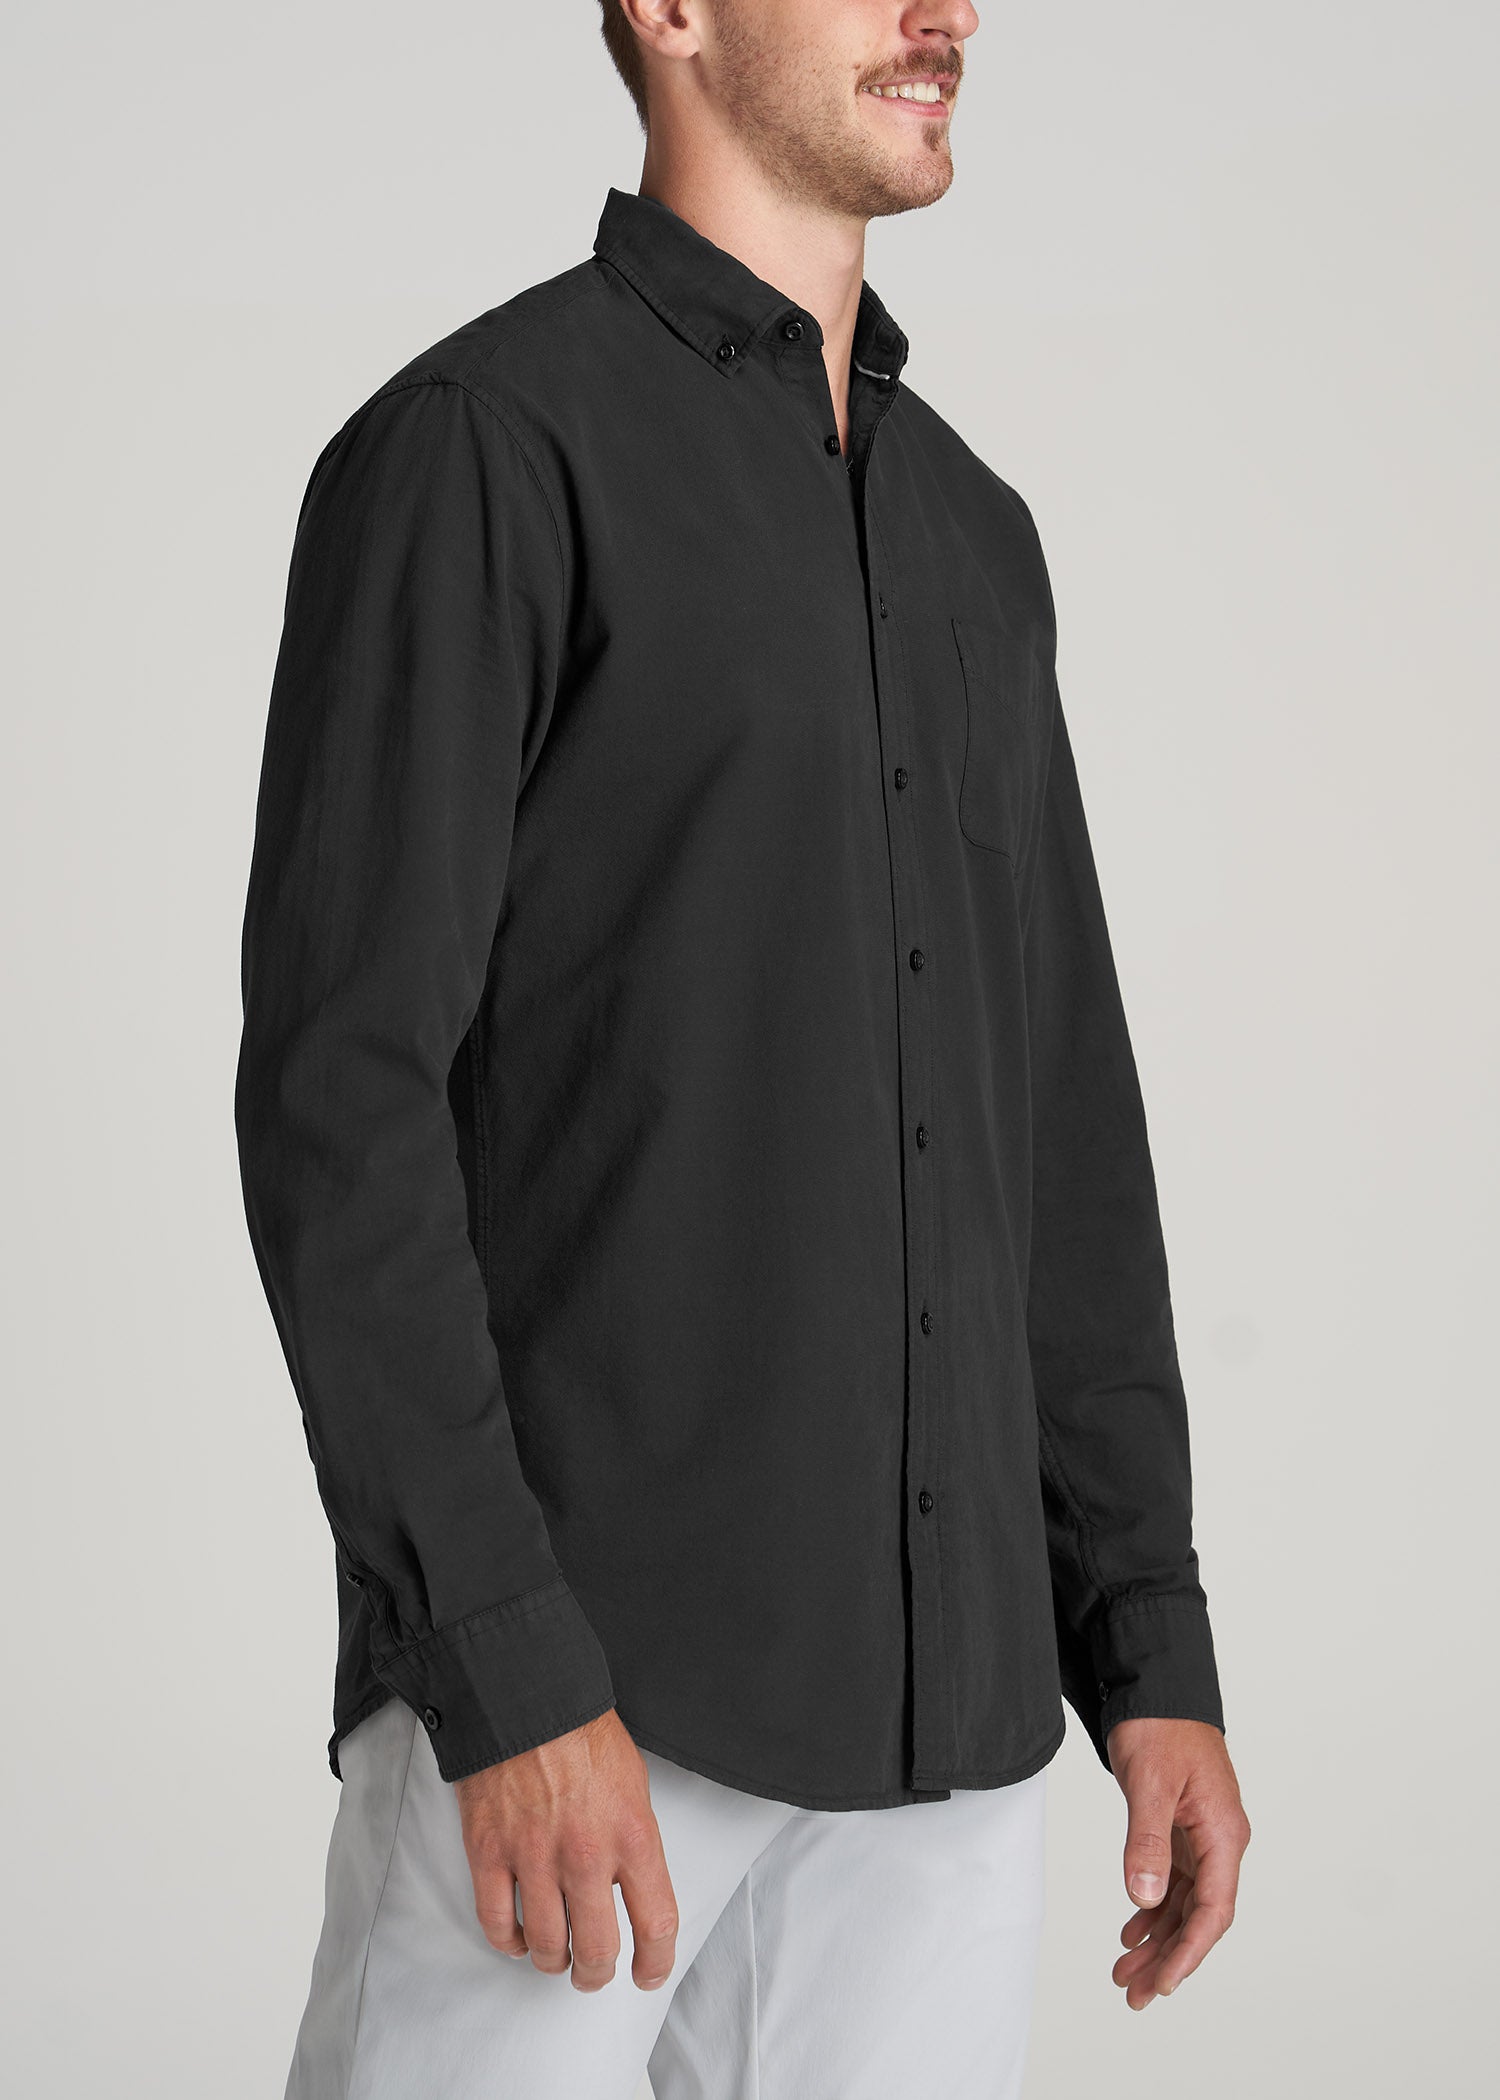 Washed Oxford Shirt For Tall Men Black | American Tall